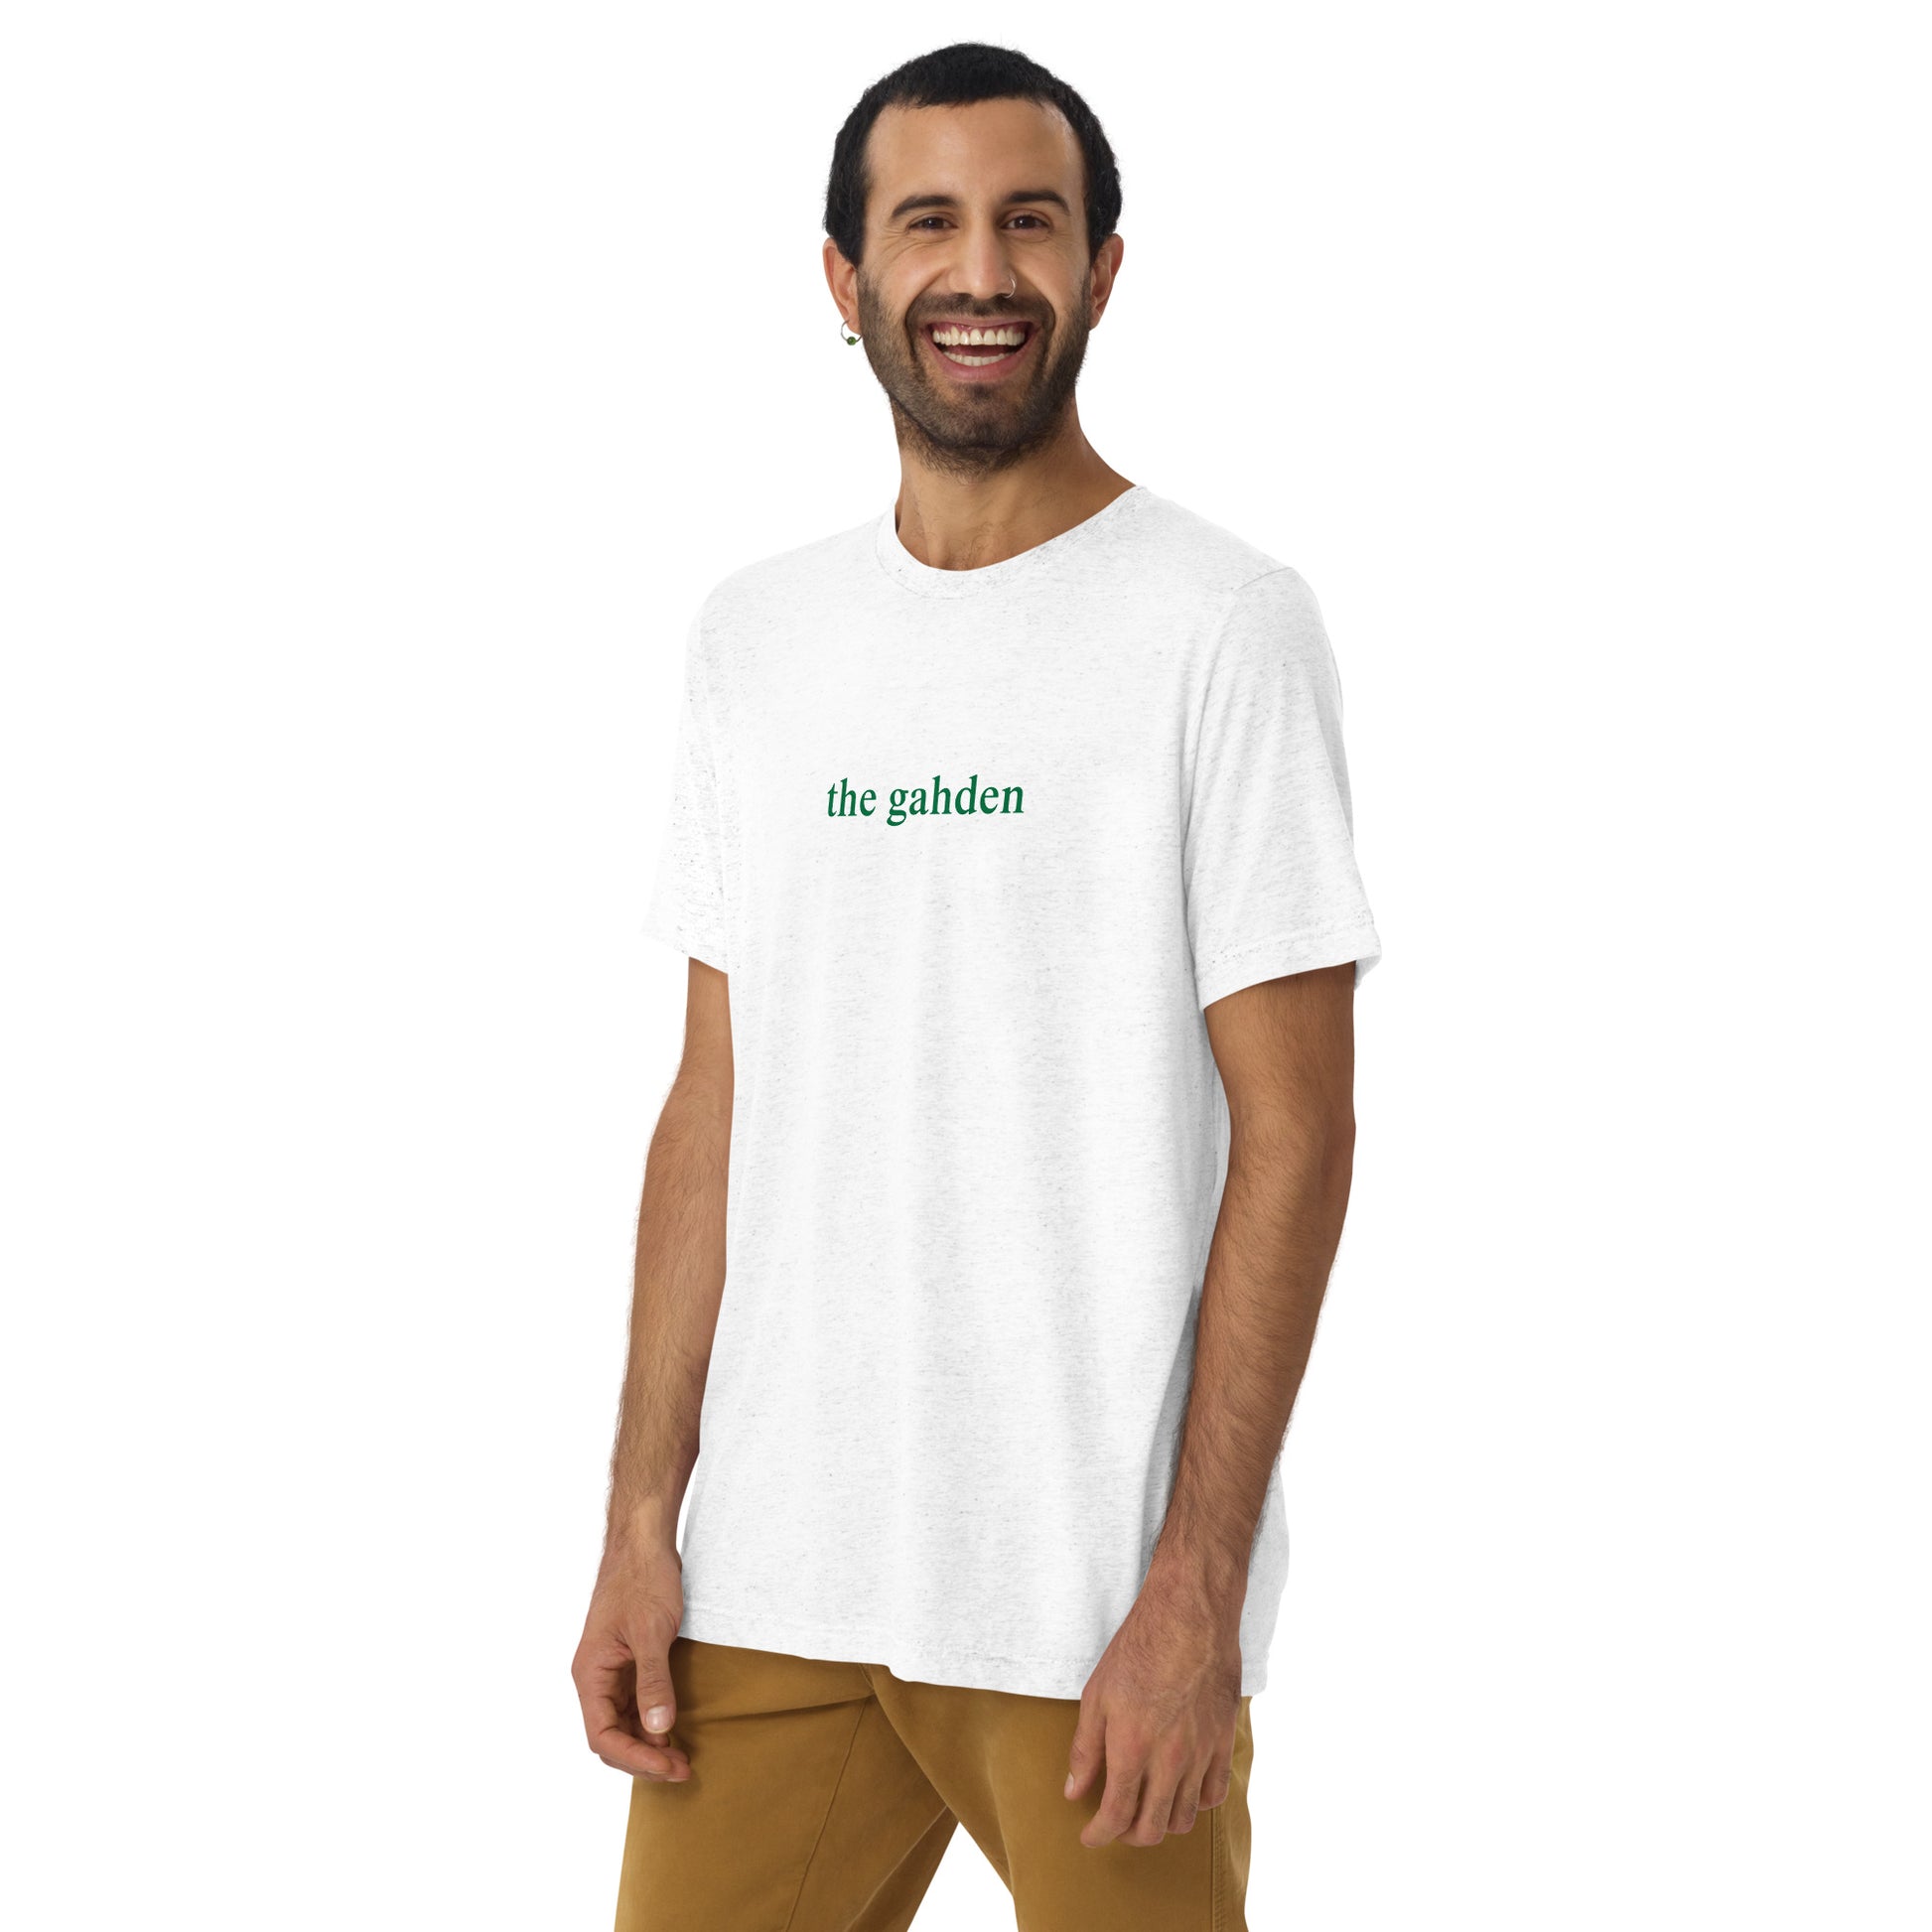 man wearing white tshirt that says "the gahden" in green lettering